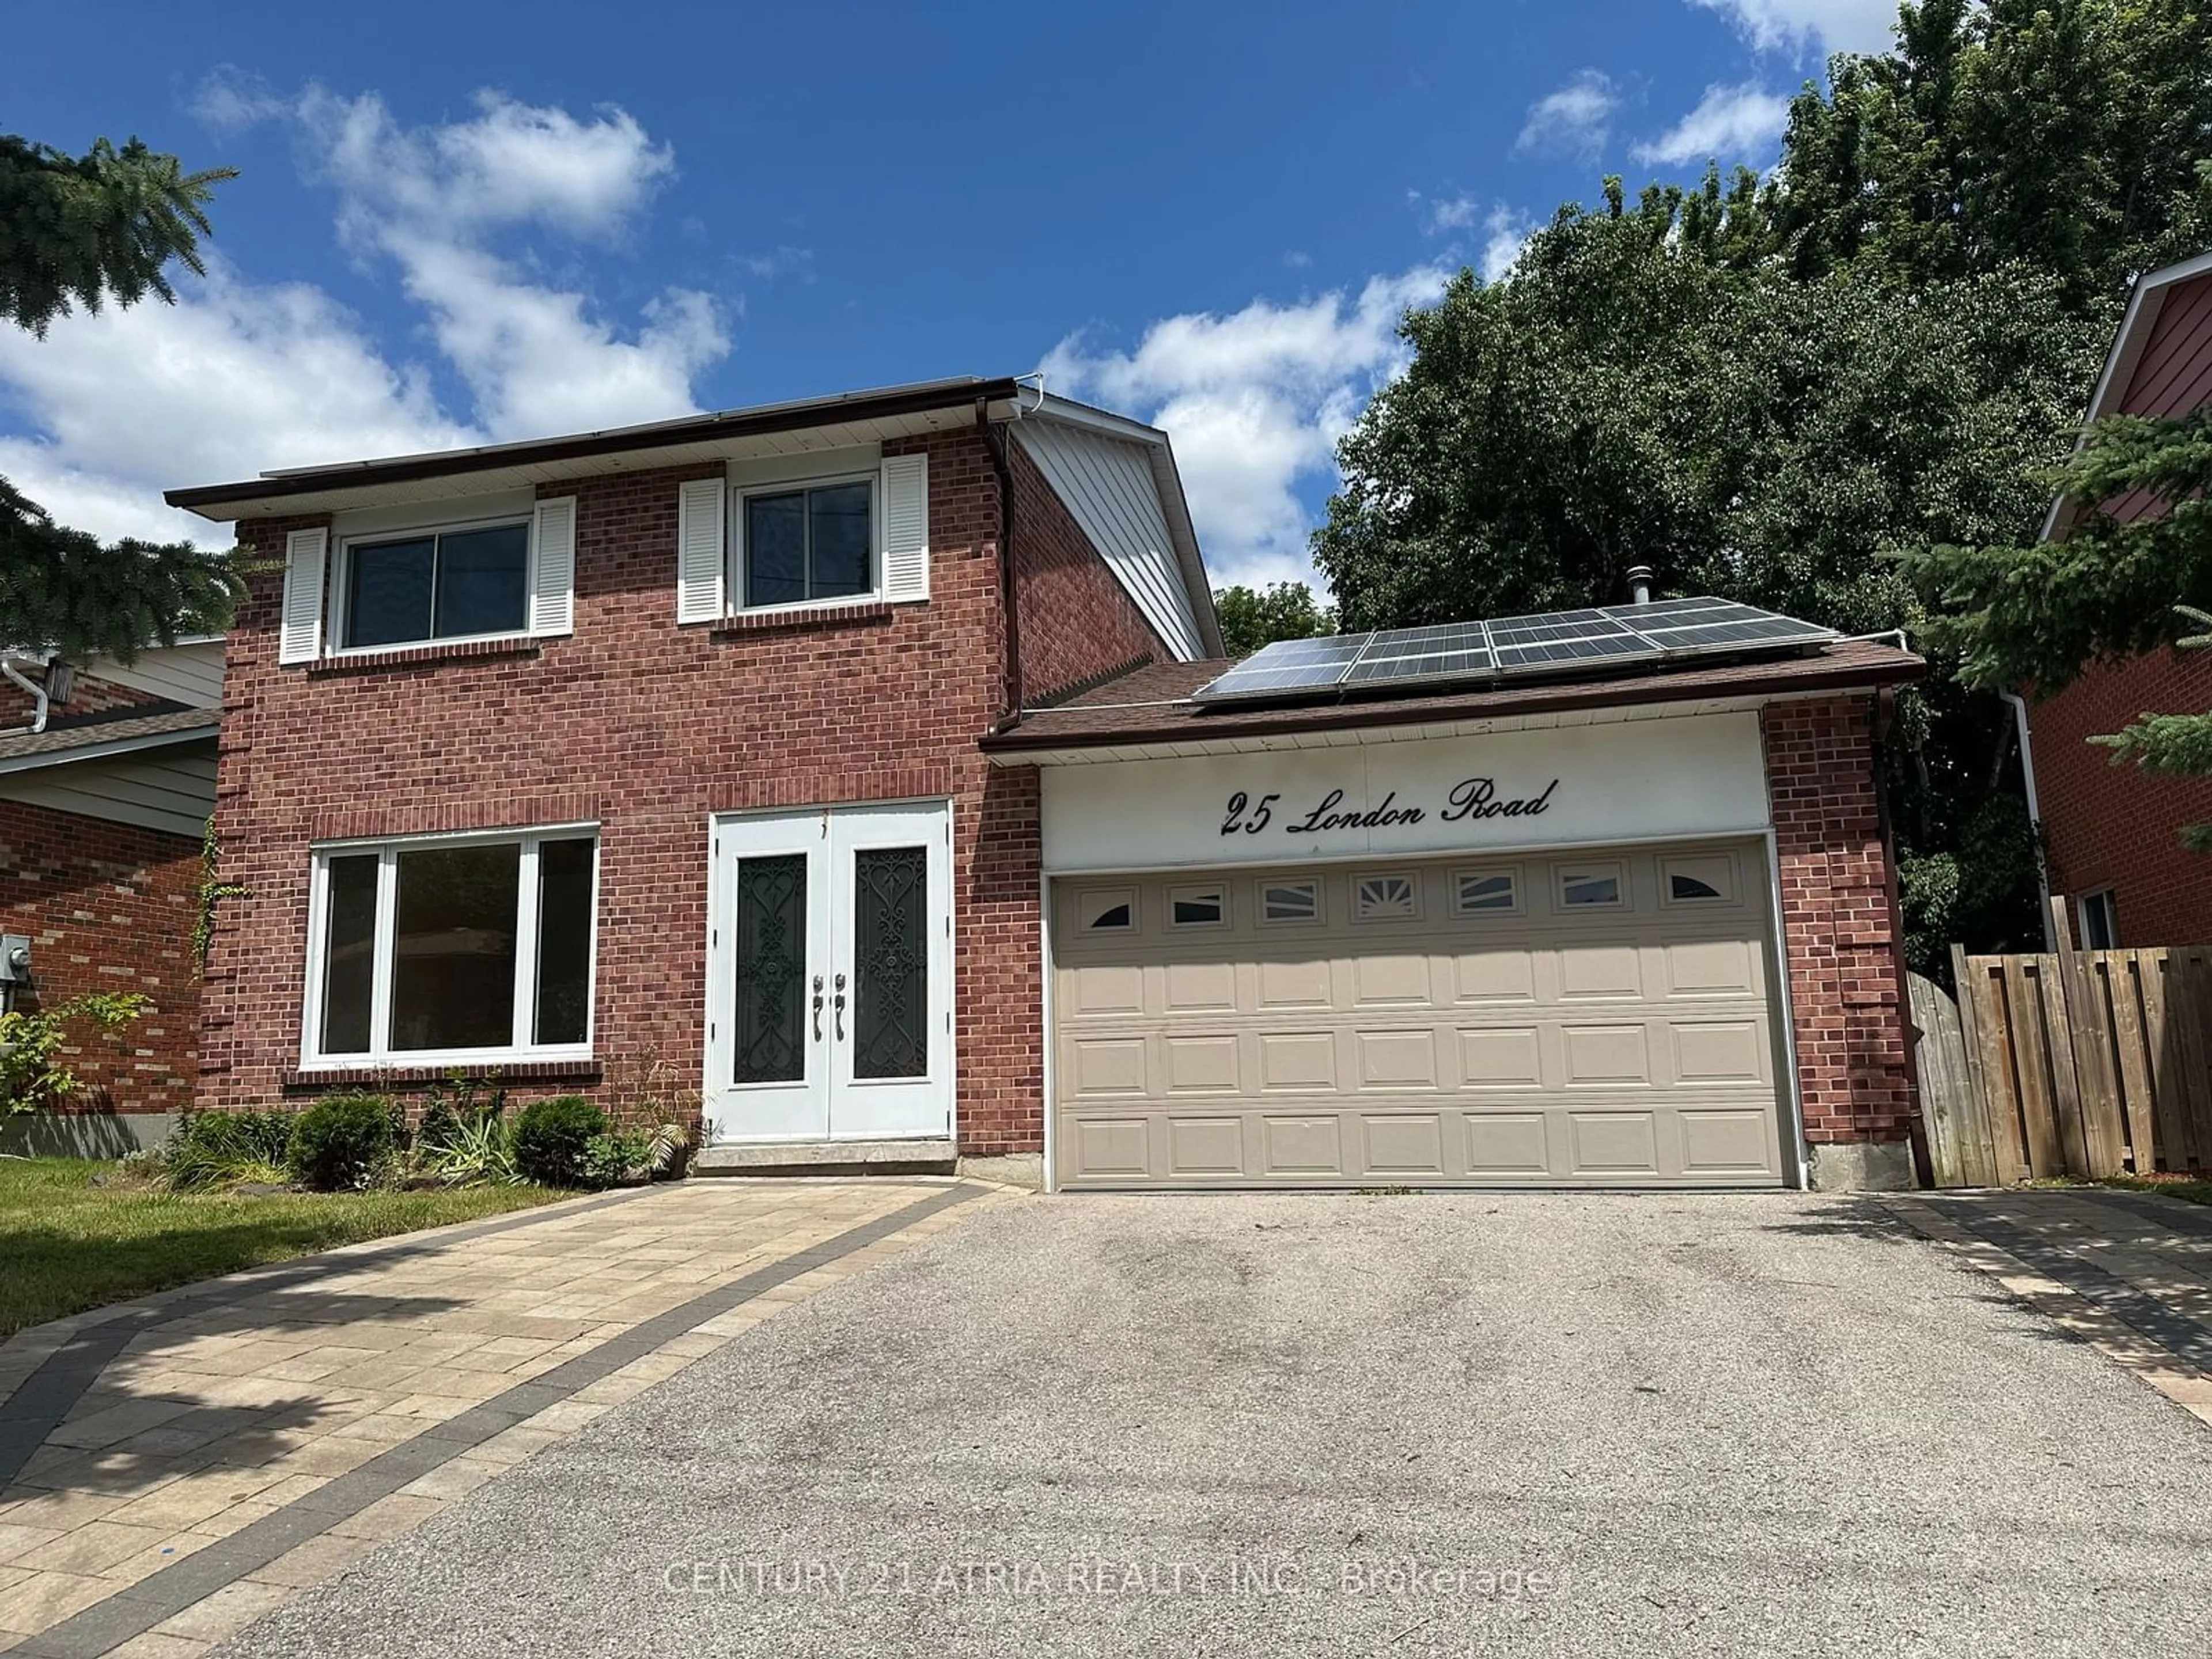 Home with brick exterior material for 25 London Rd, Newmarket Ontario L3Y 6A1